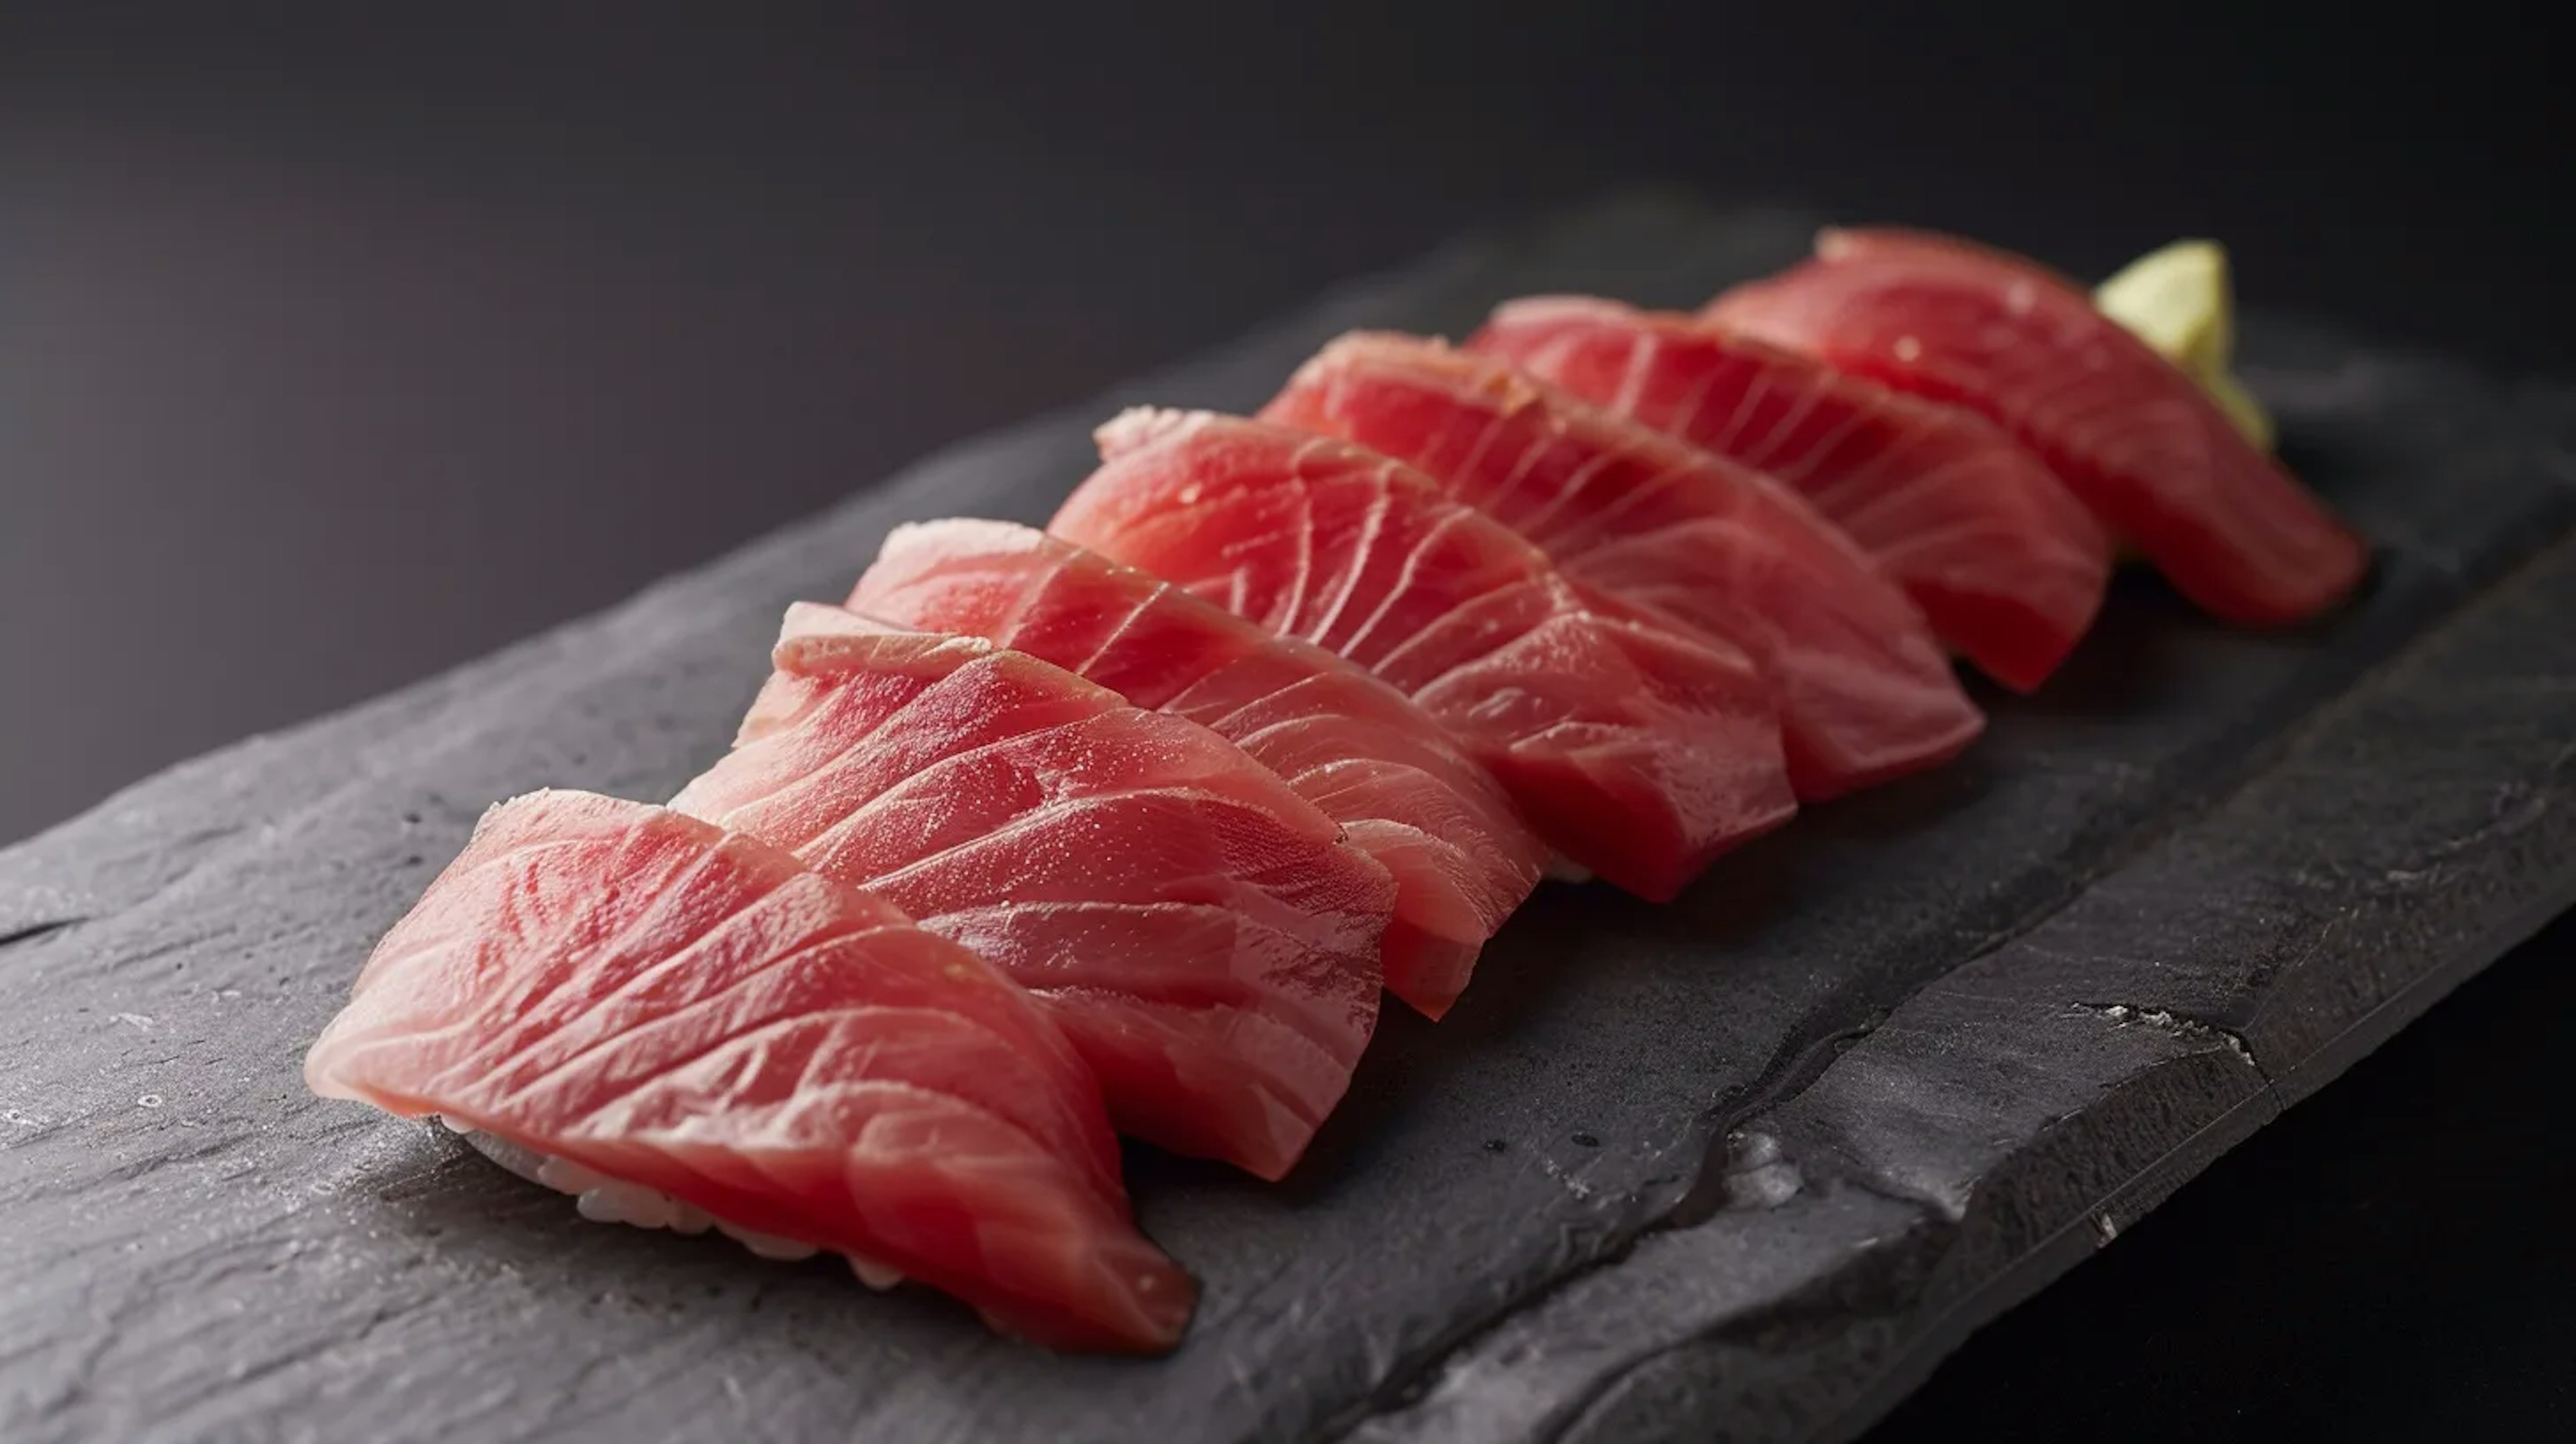 Chutoro and otoro tuna slices side by side on a Japanese sushi board, highlighting their marbling differences